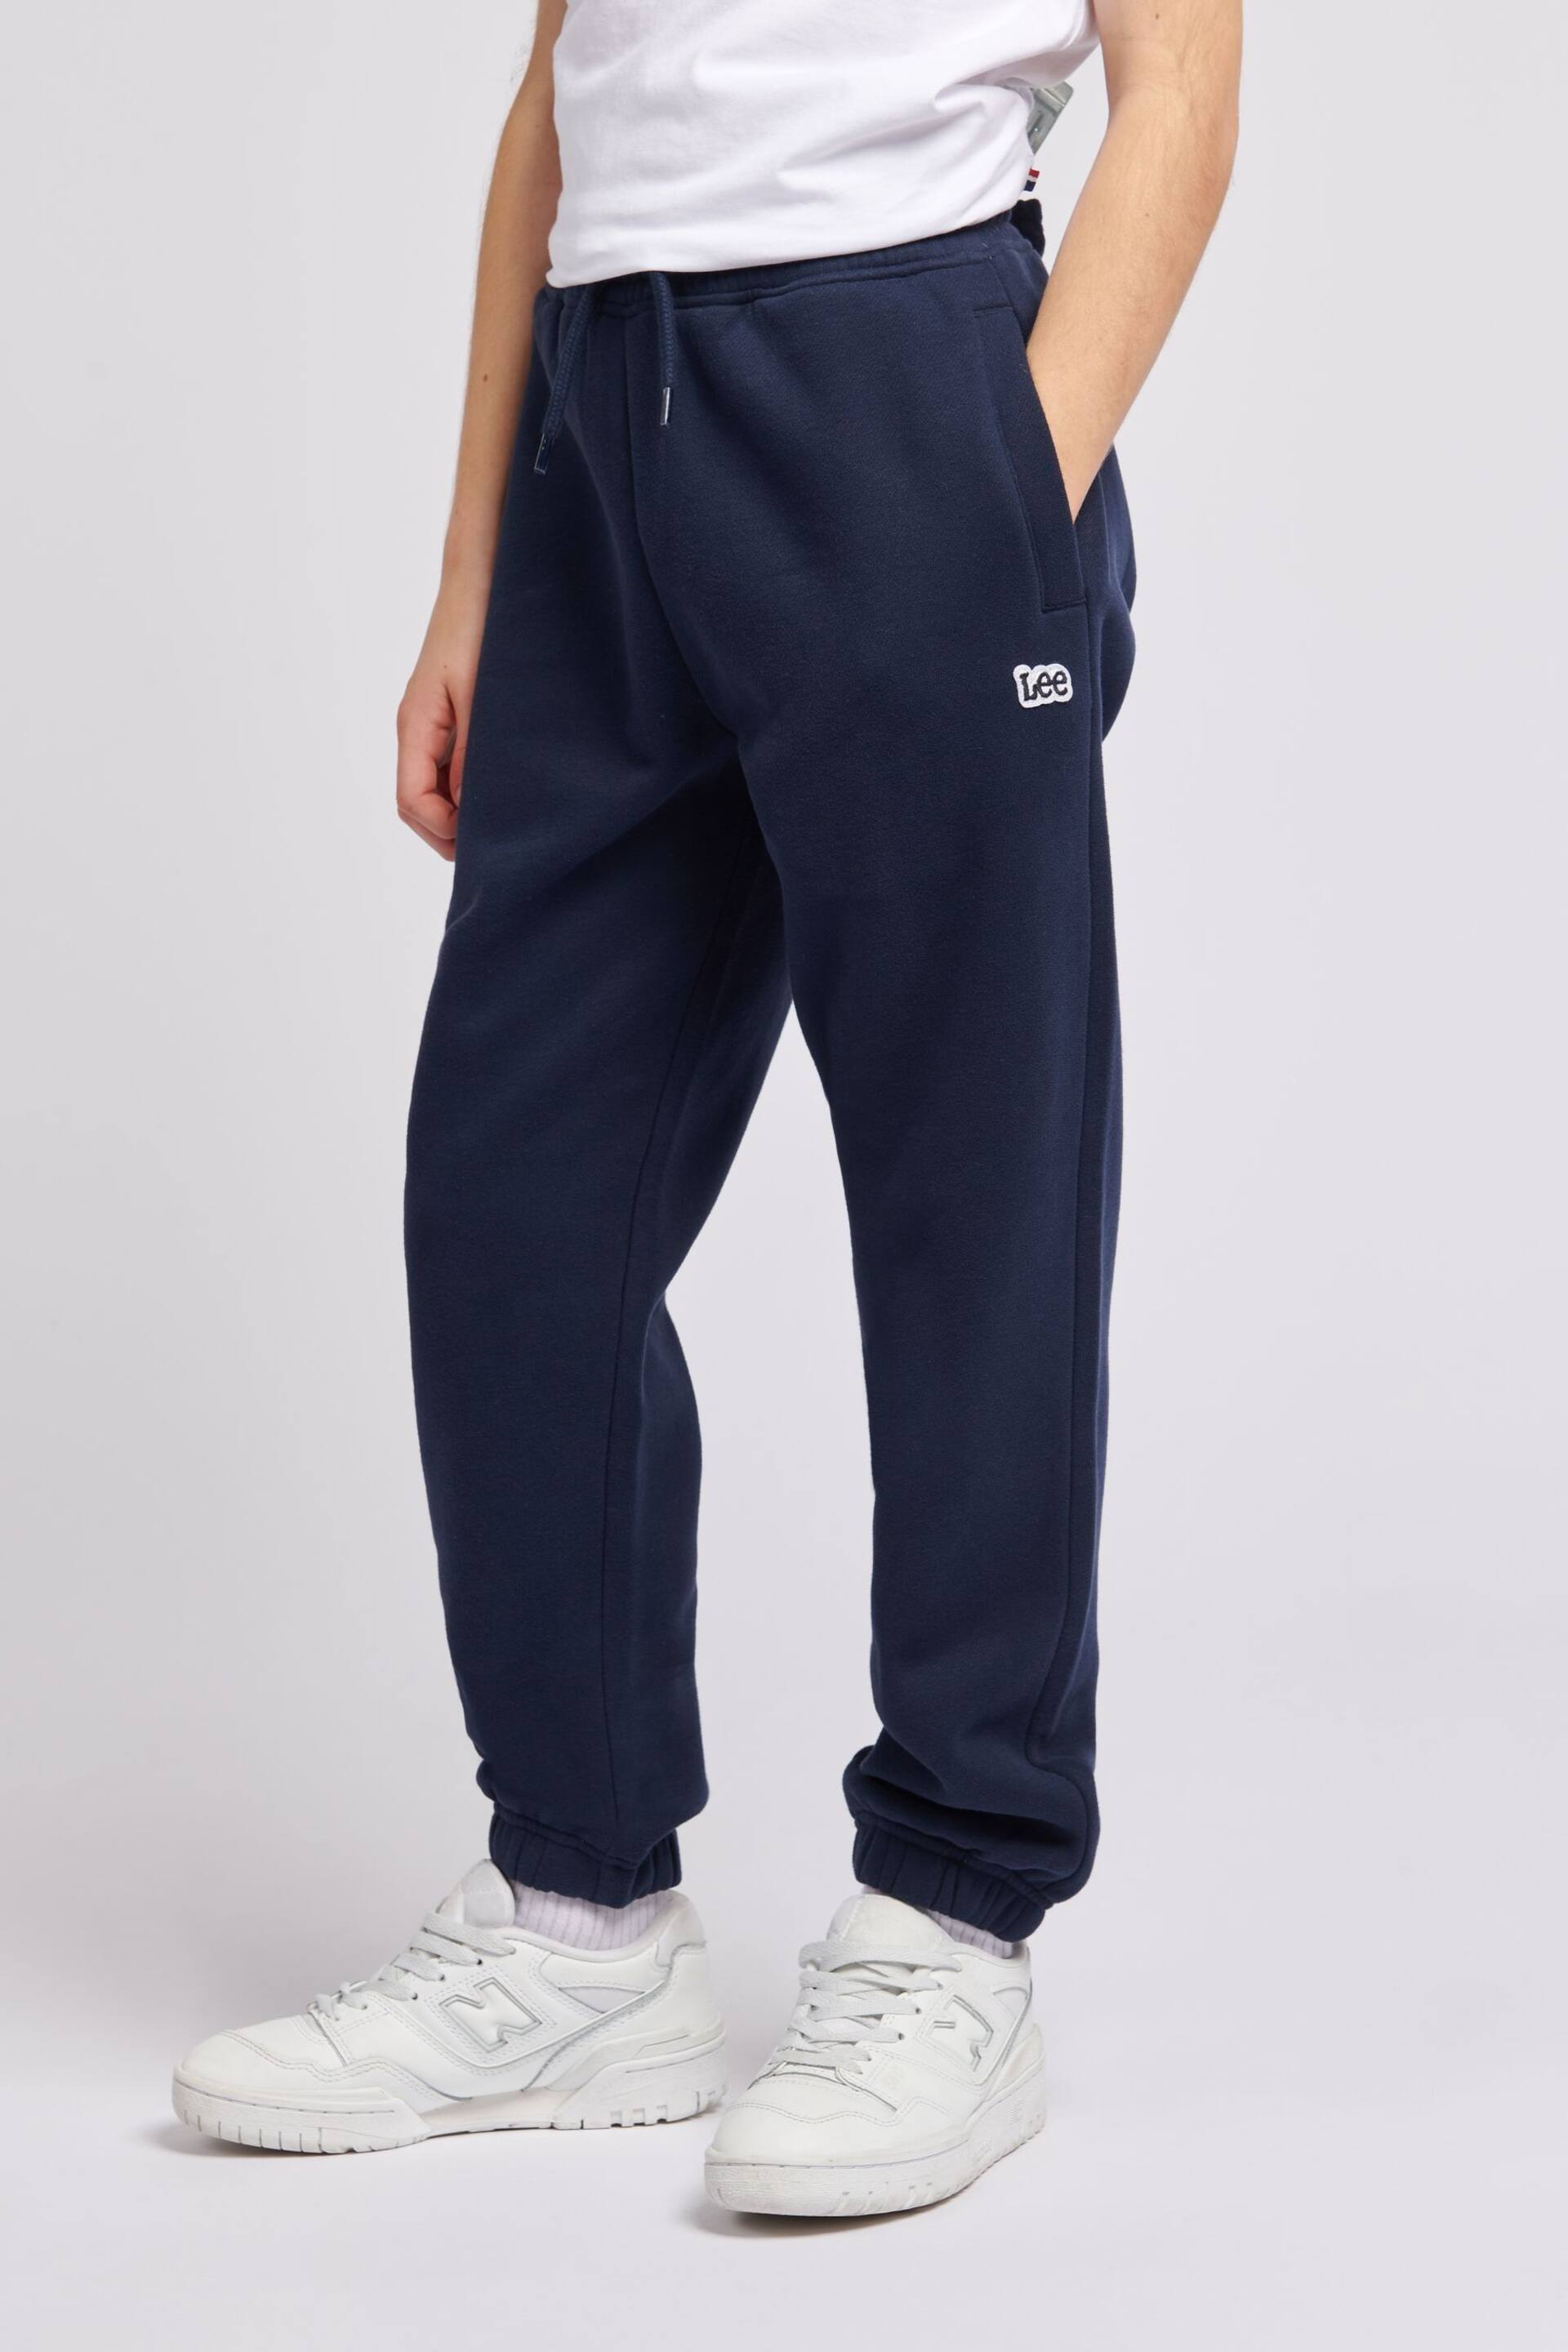 Lee Boys Blue Badge Joggers - Image 1 of 5